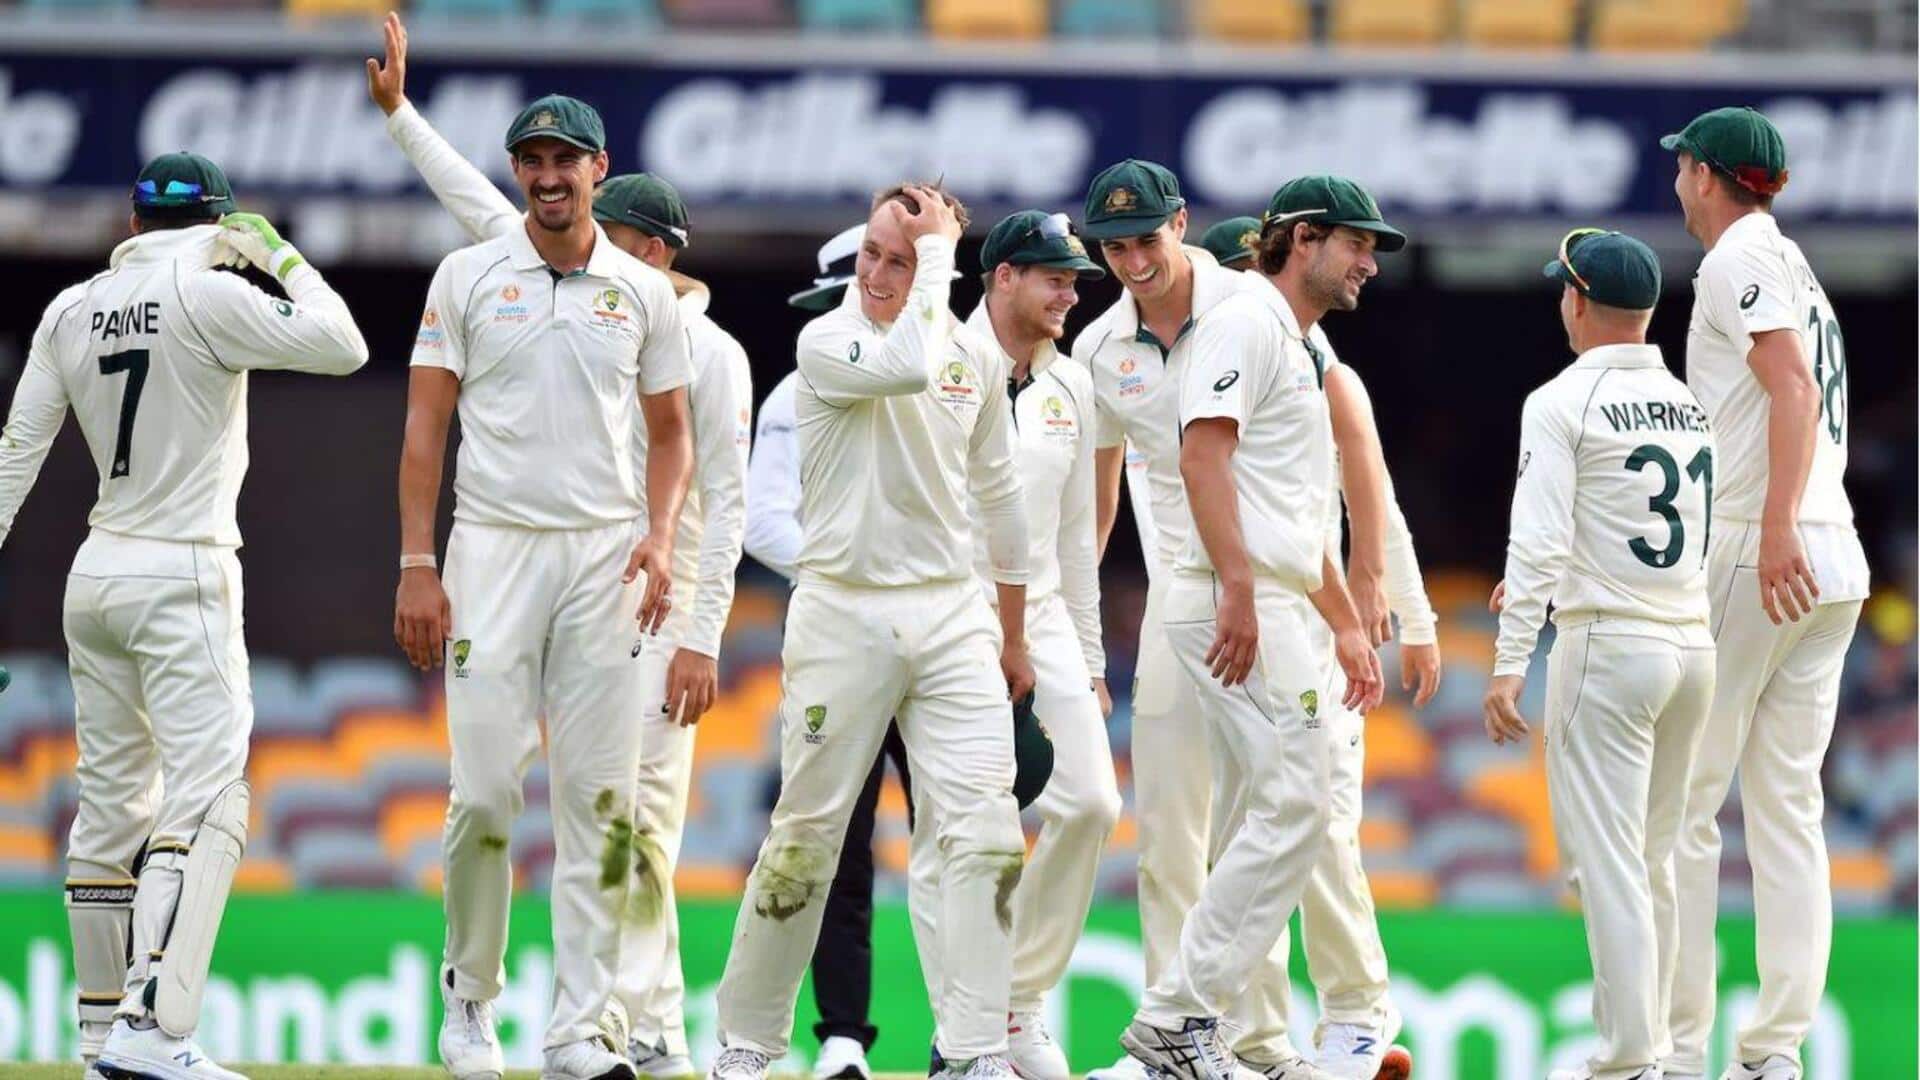 Australia vs Pakistan, Test series: Here is the statistical preview